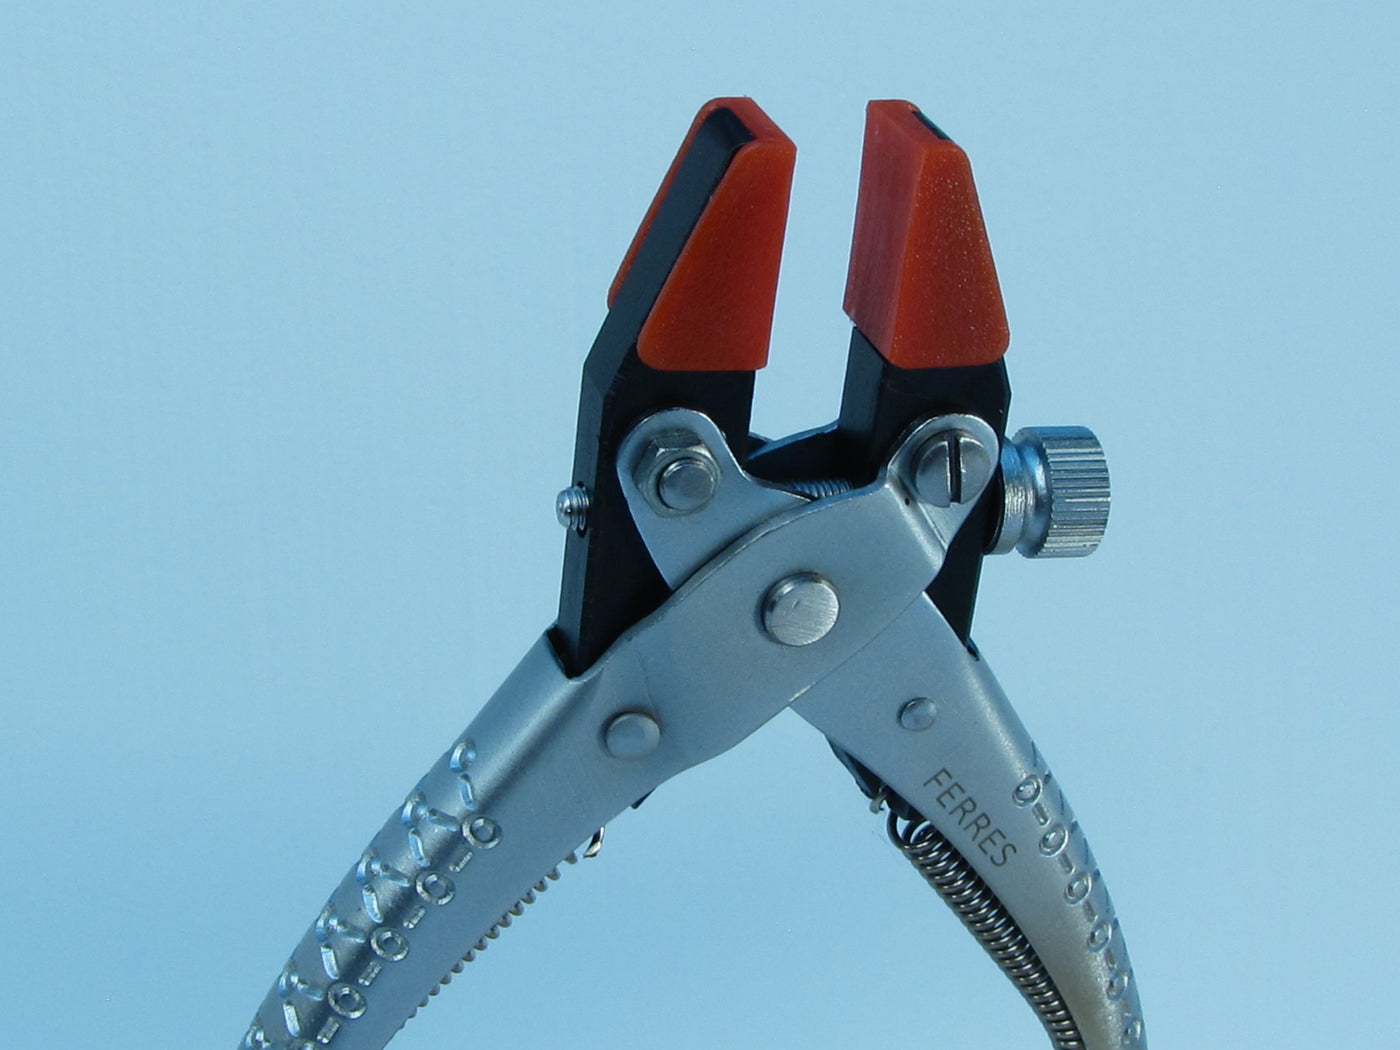 F62 Flat Nose Pliers